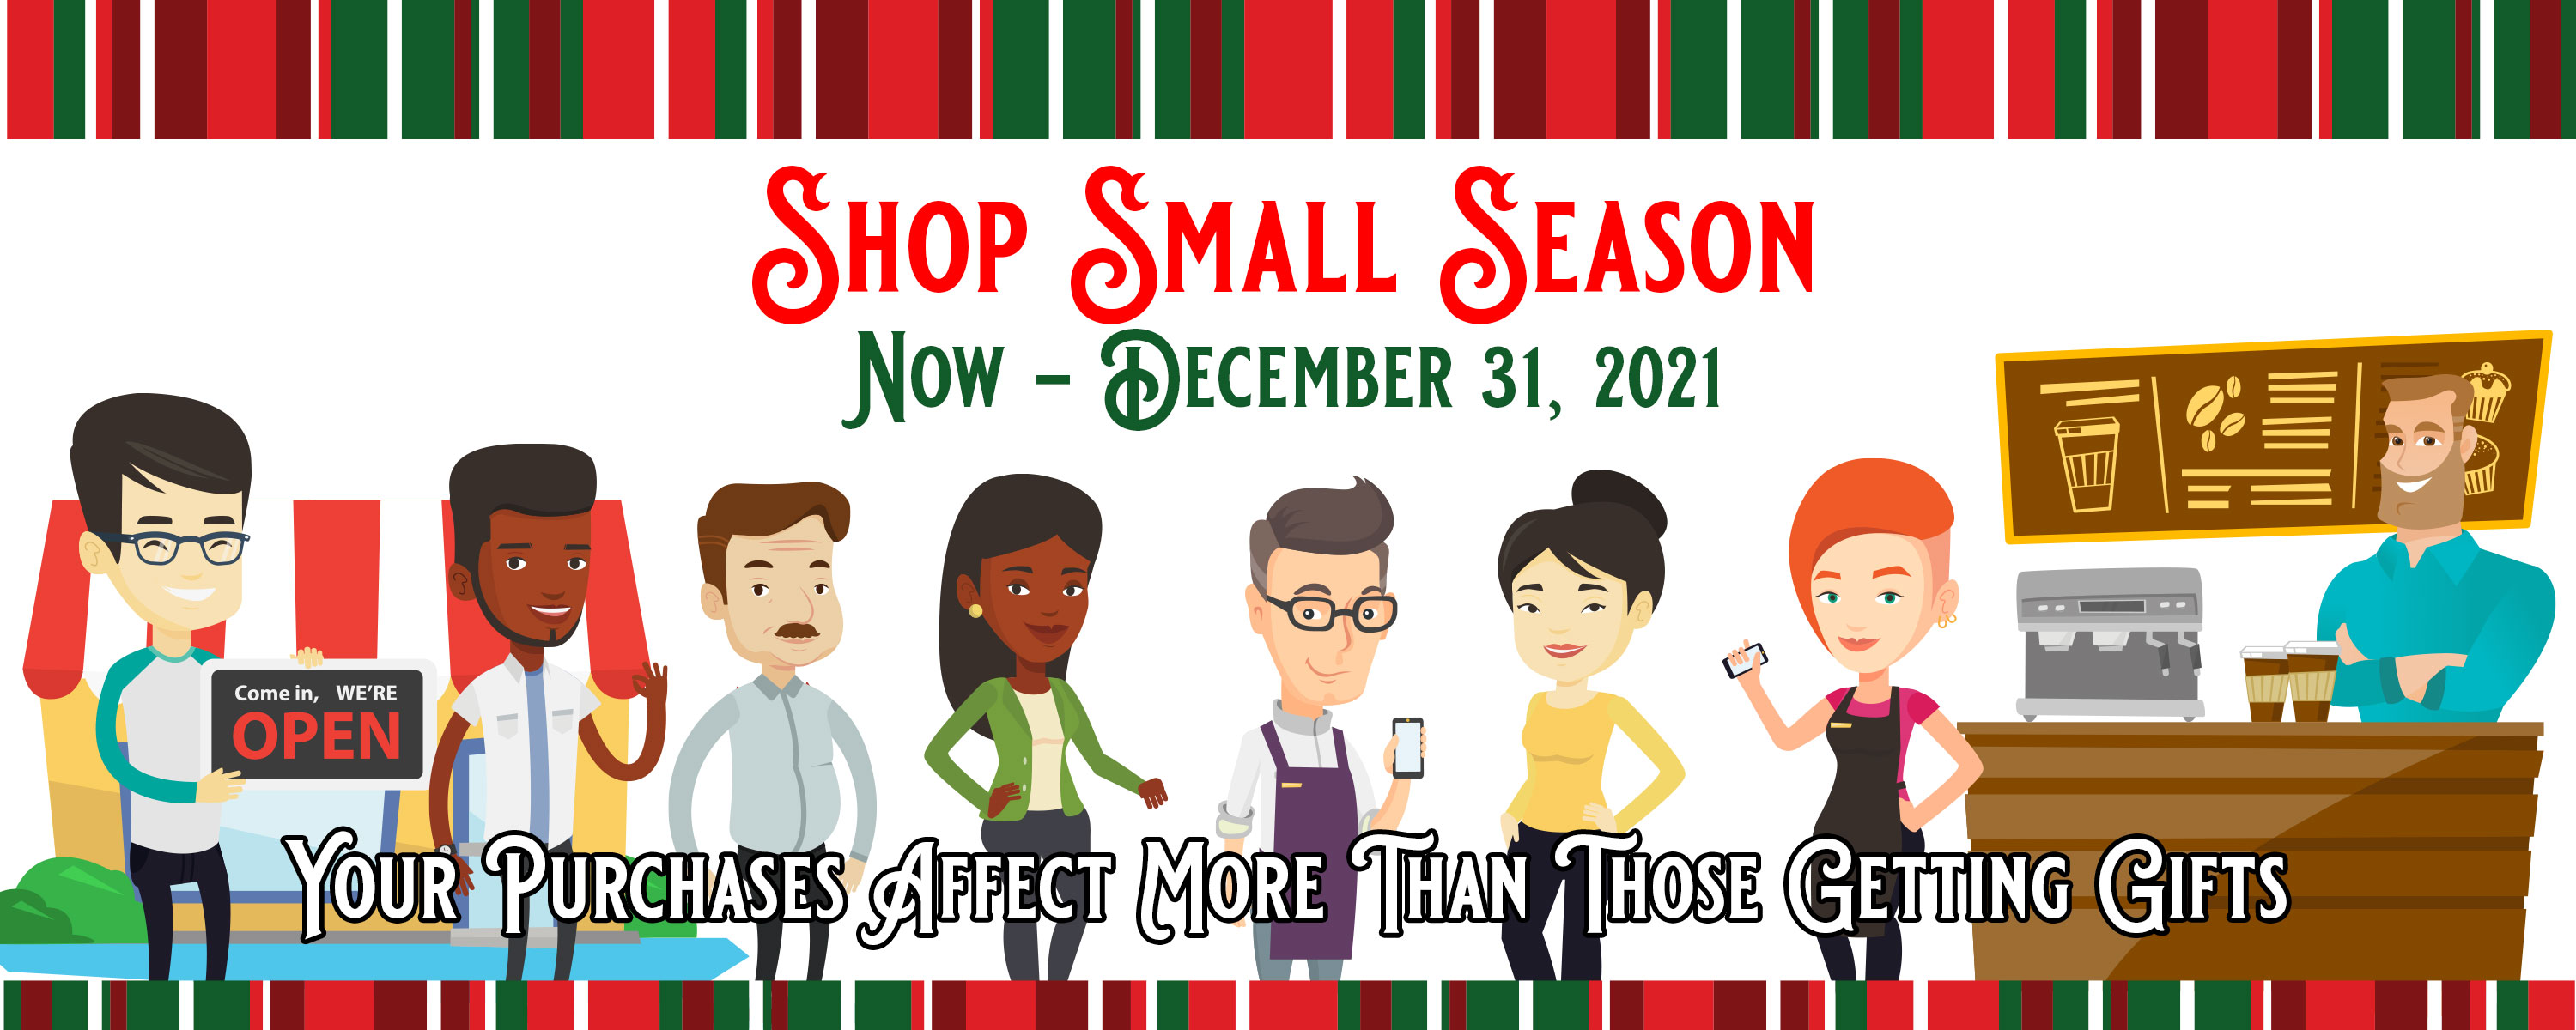 Small Business Season graphic featuring business owners and employees of different genders and ethnicities